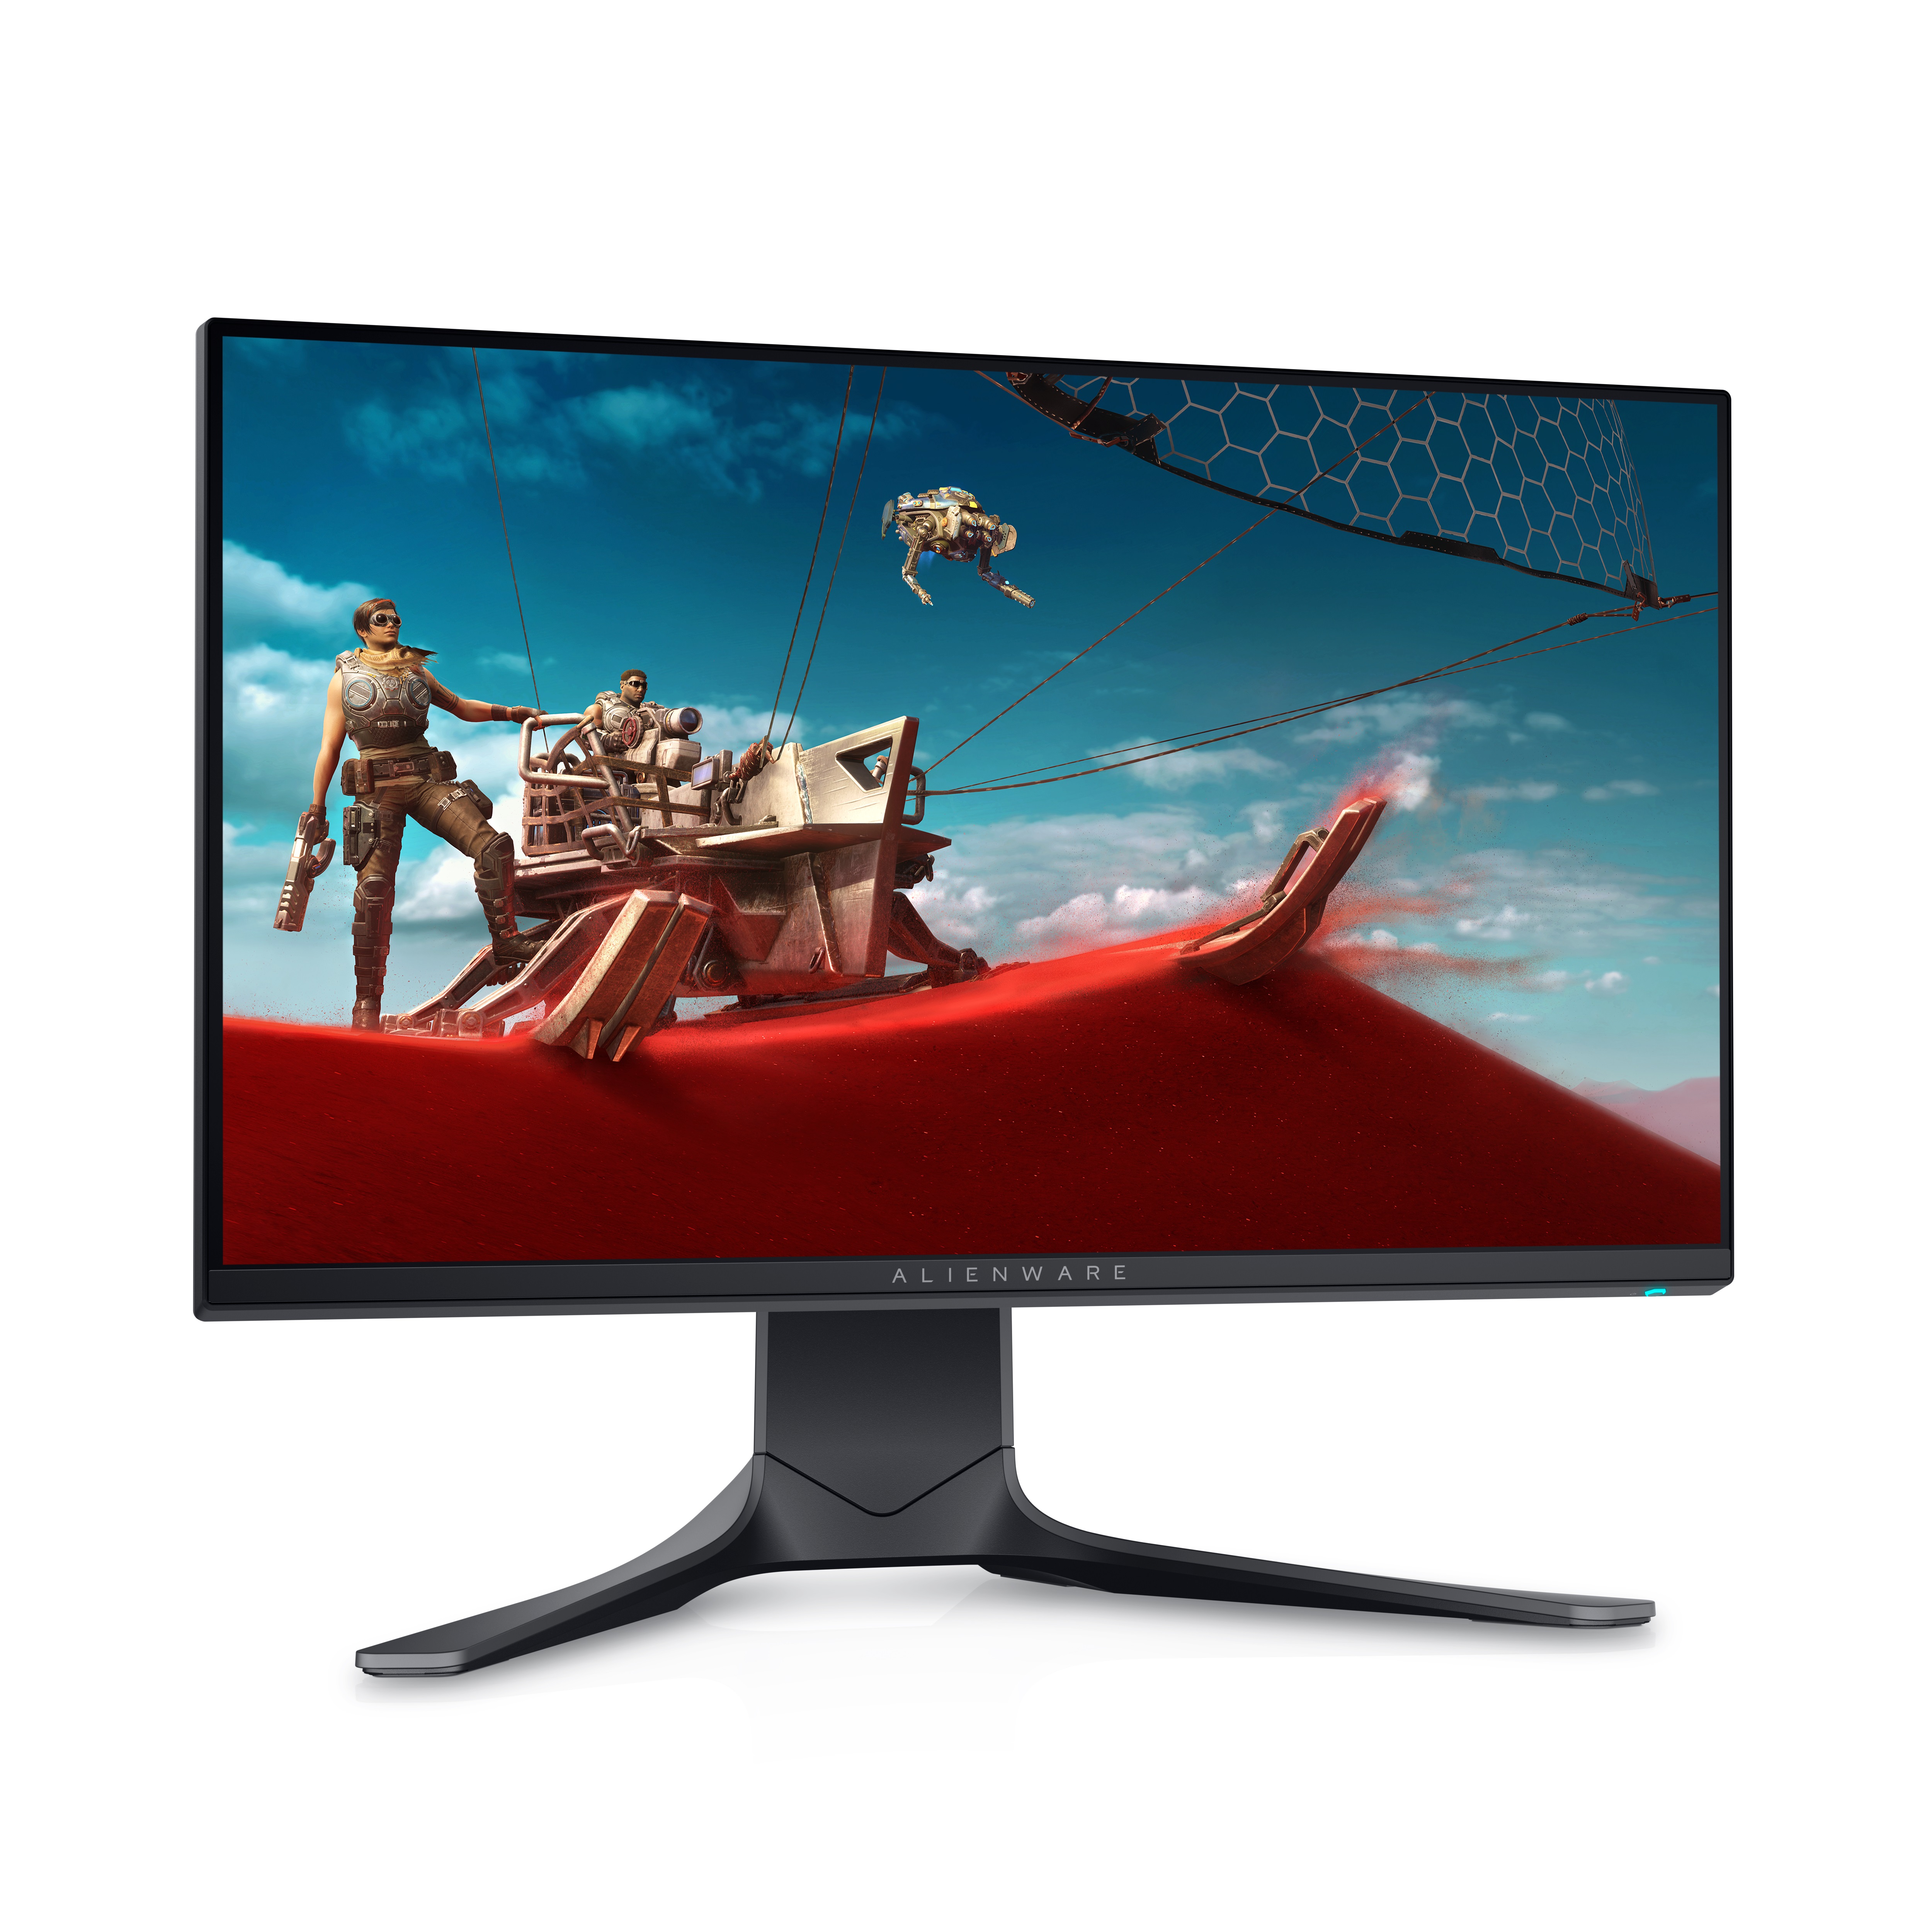 Photo of Alienware 25 Gaming Monitor with game on screen